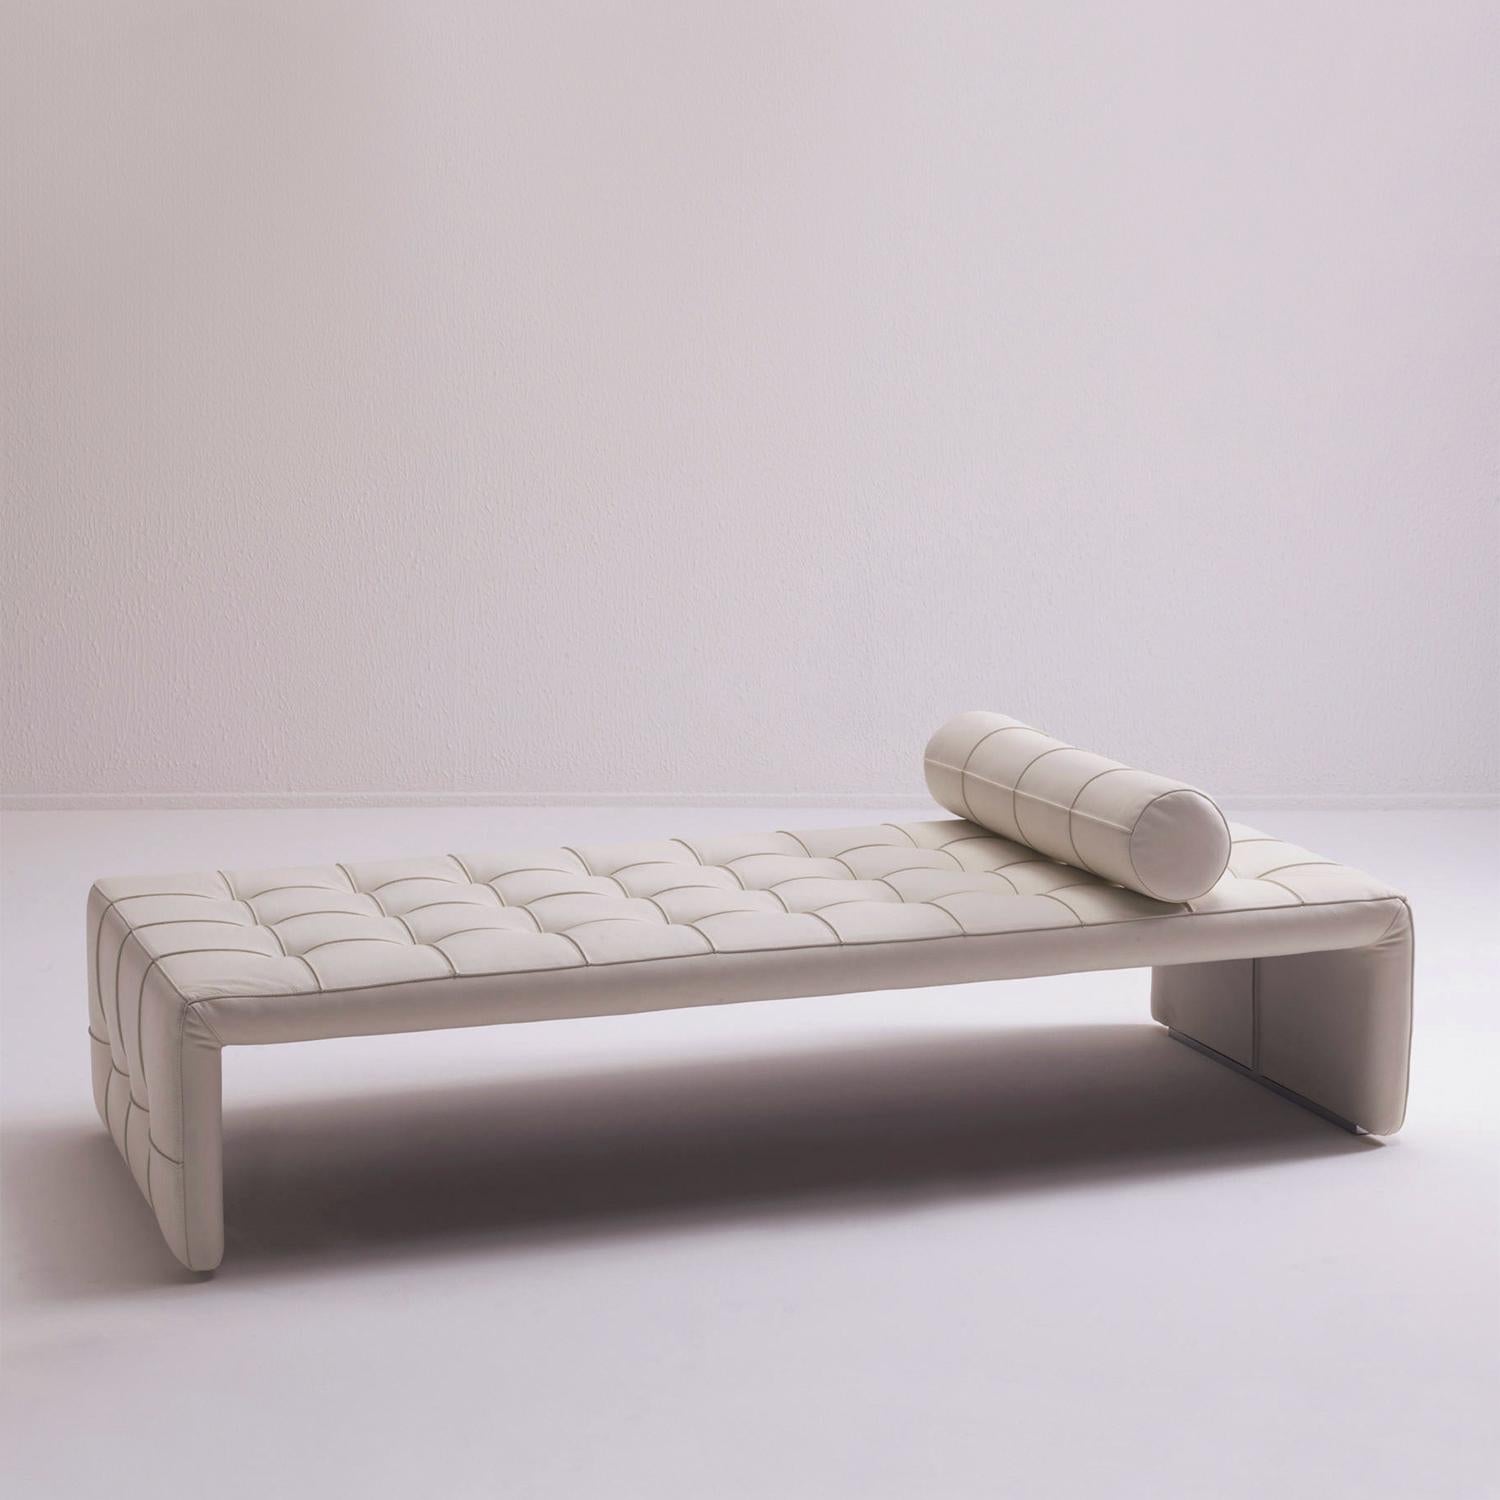 Bench Barney with solid wood structure upholstered
and covered with genuine italian leather CAT. Leather,
in white cream finish. Cushion included. 
Also available with other leather colors, on request.